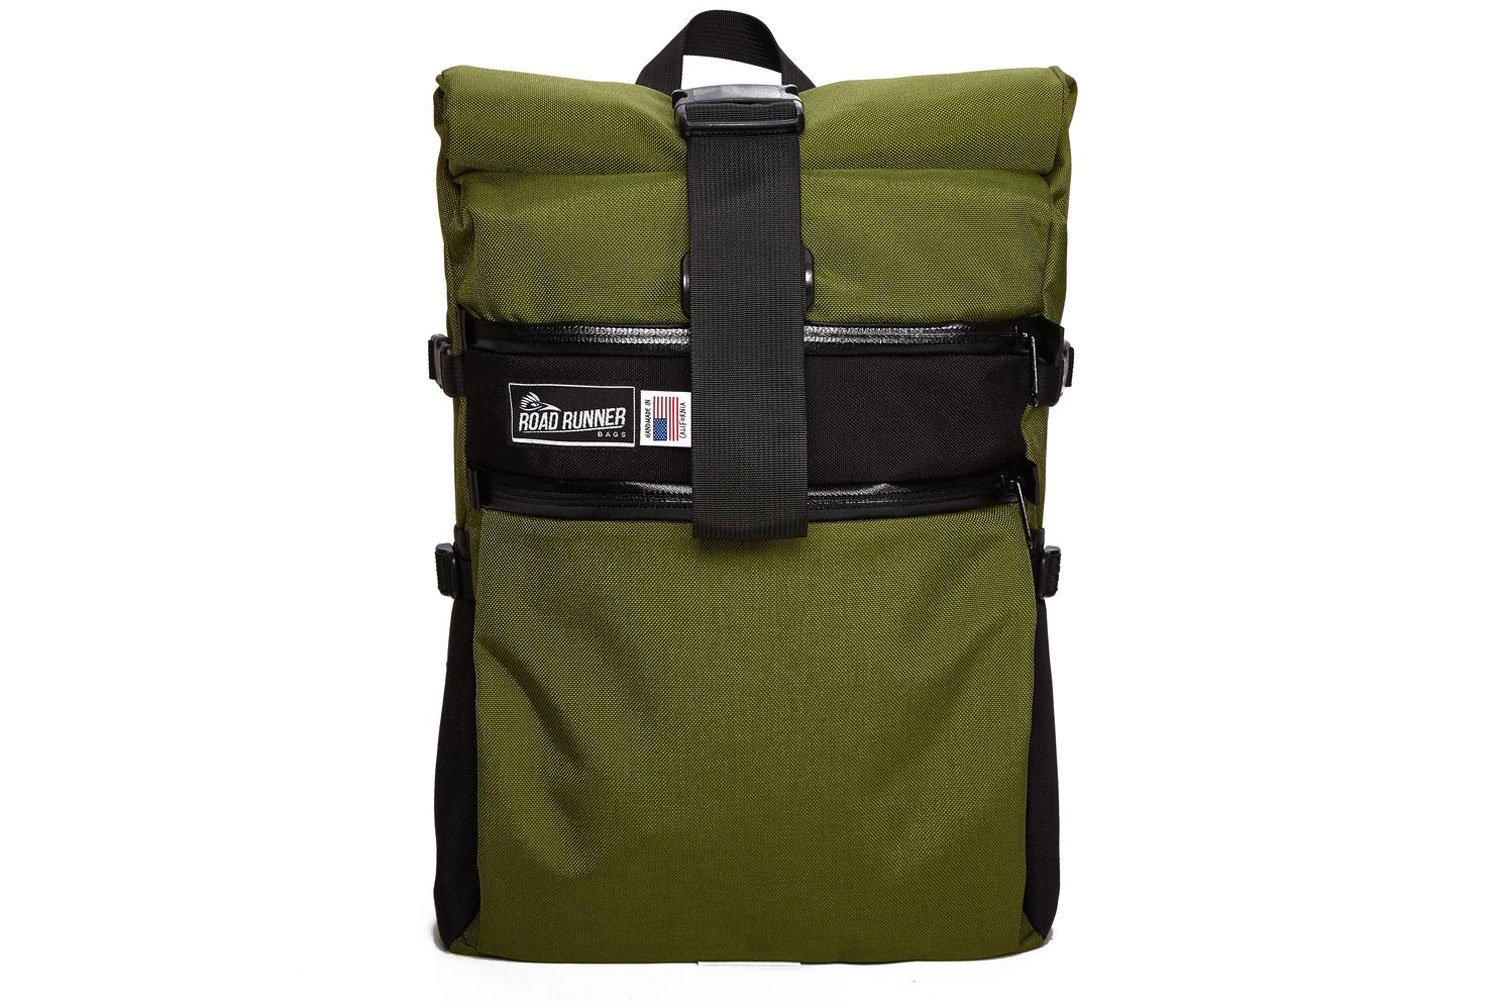 Large Roll Top Backpack-Pro (ラージロールトップバッグ・プロ 